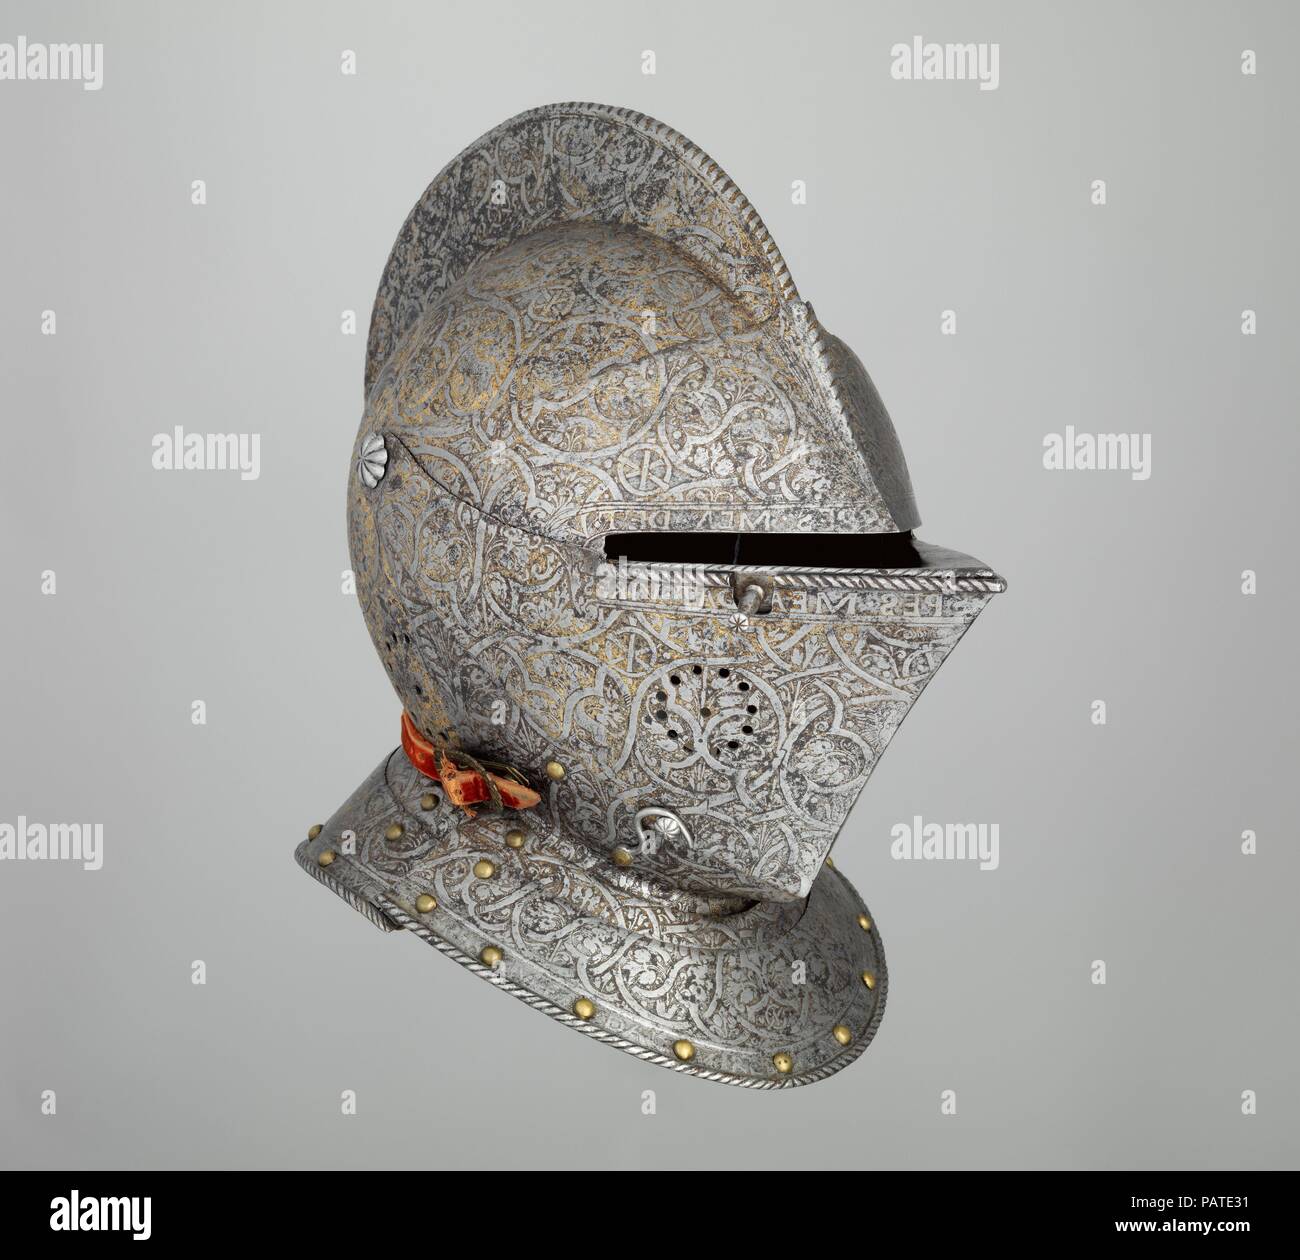 Close Helmet of Claude Gouffier (1501-1570). Culture: French. Dimensions: H. 15 3/4 in. (40 cm); W. 8 1/4 in. (21 cm); D. 14 1/2 in. (36.8 cm); Wt. 6 lb. 5 oz. (2863 g). Date: ca. 1555-60.  This is an excellent example of a French heavy cavalry helmet of the mid-sixteenth century. Its elaborate decoration includes the monogram of Claude Gouffier (1501-1570), Master of the Horse (Grand Écuyer) for Henry II and Charles IX. This monogram is also on a knee piece from the armor of Gouffier's in the Metropolitan Museum's collection (acc. no. 1994.390). Museum: Metropolitan Museum of Art, New York, U Stock Photo